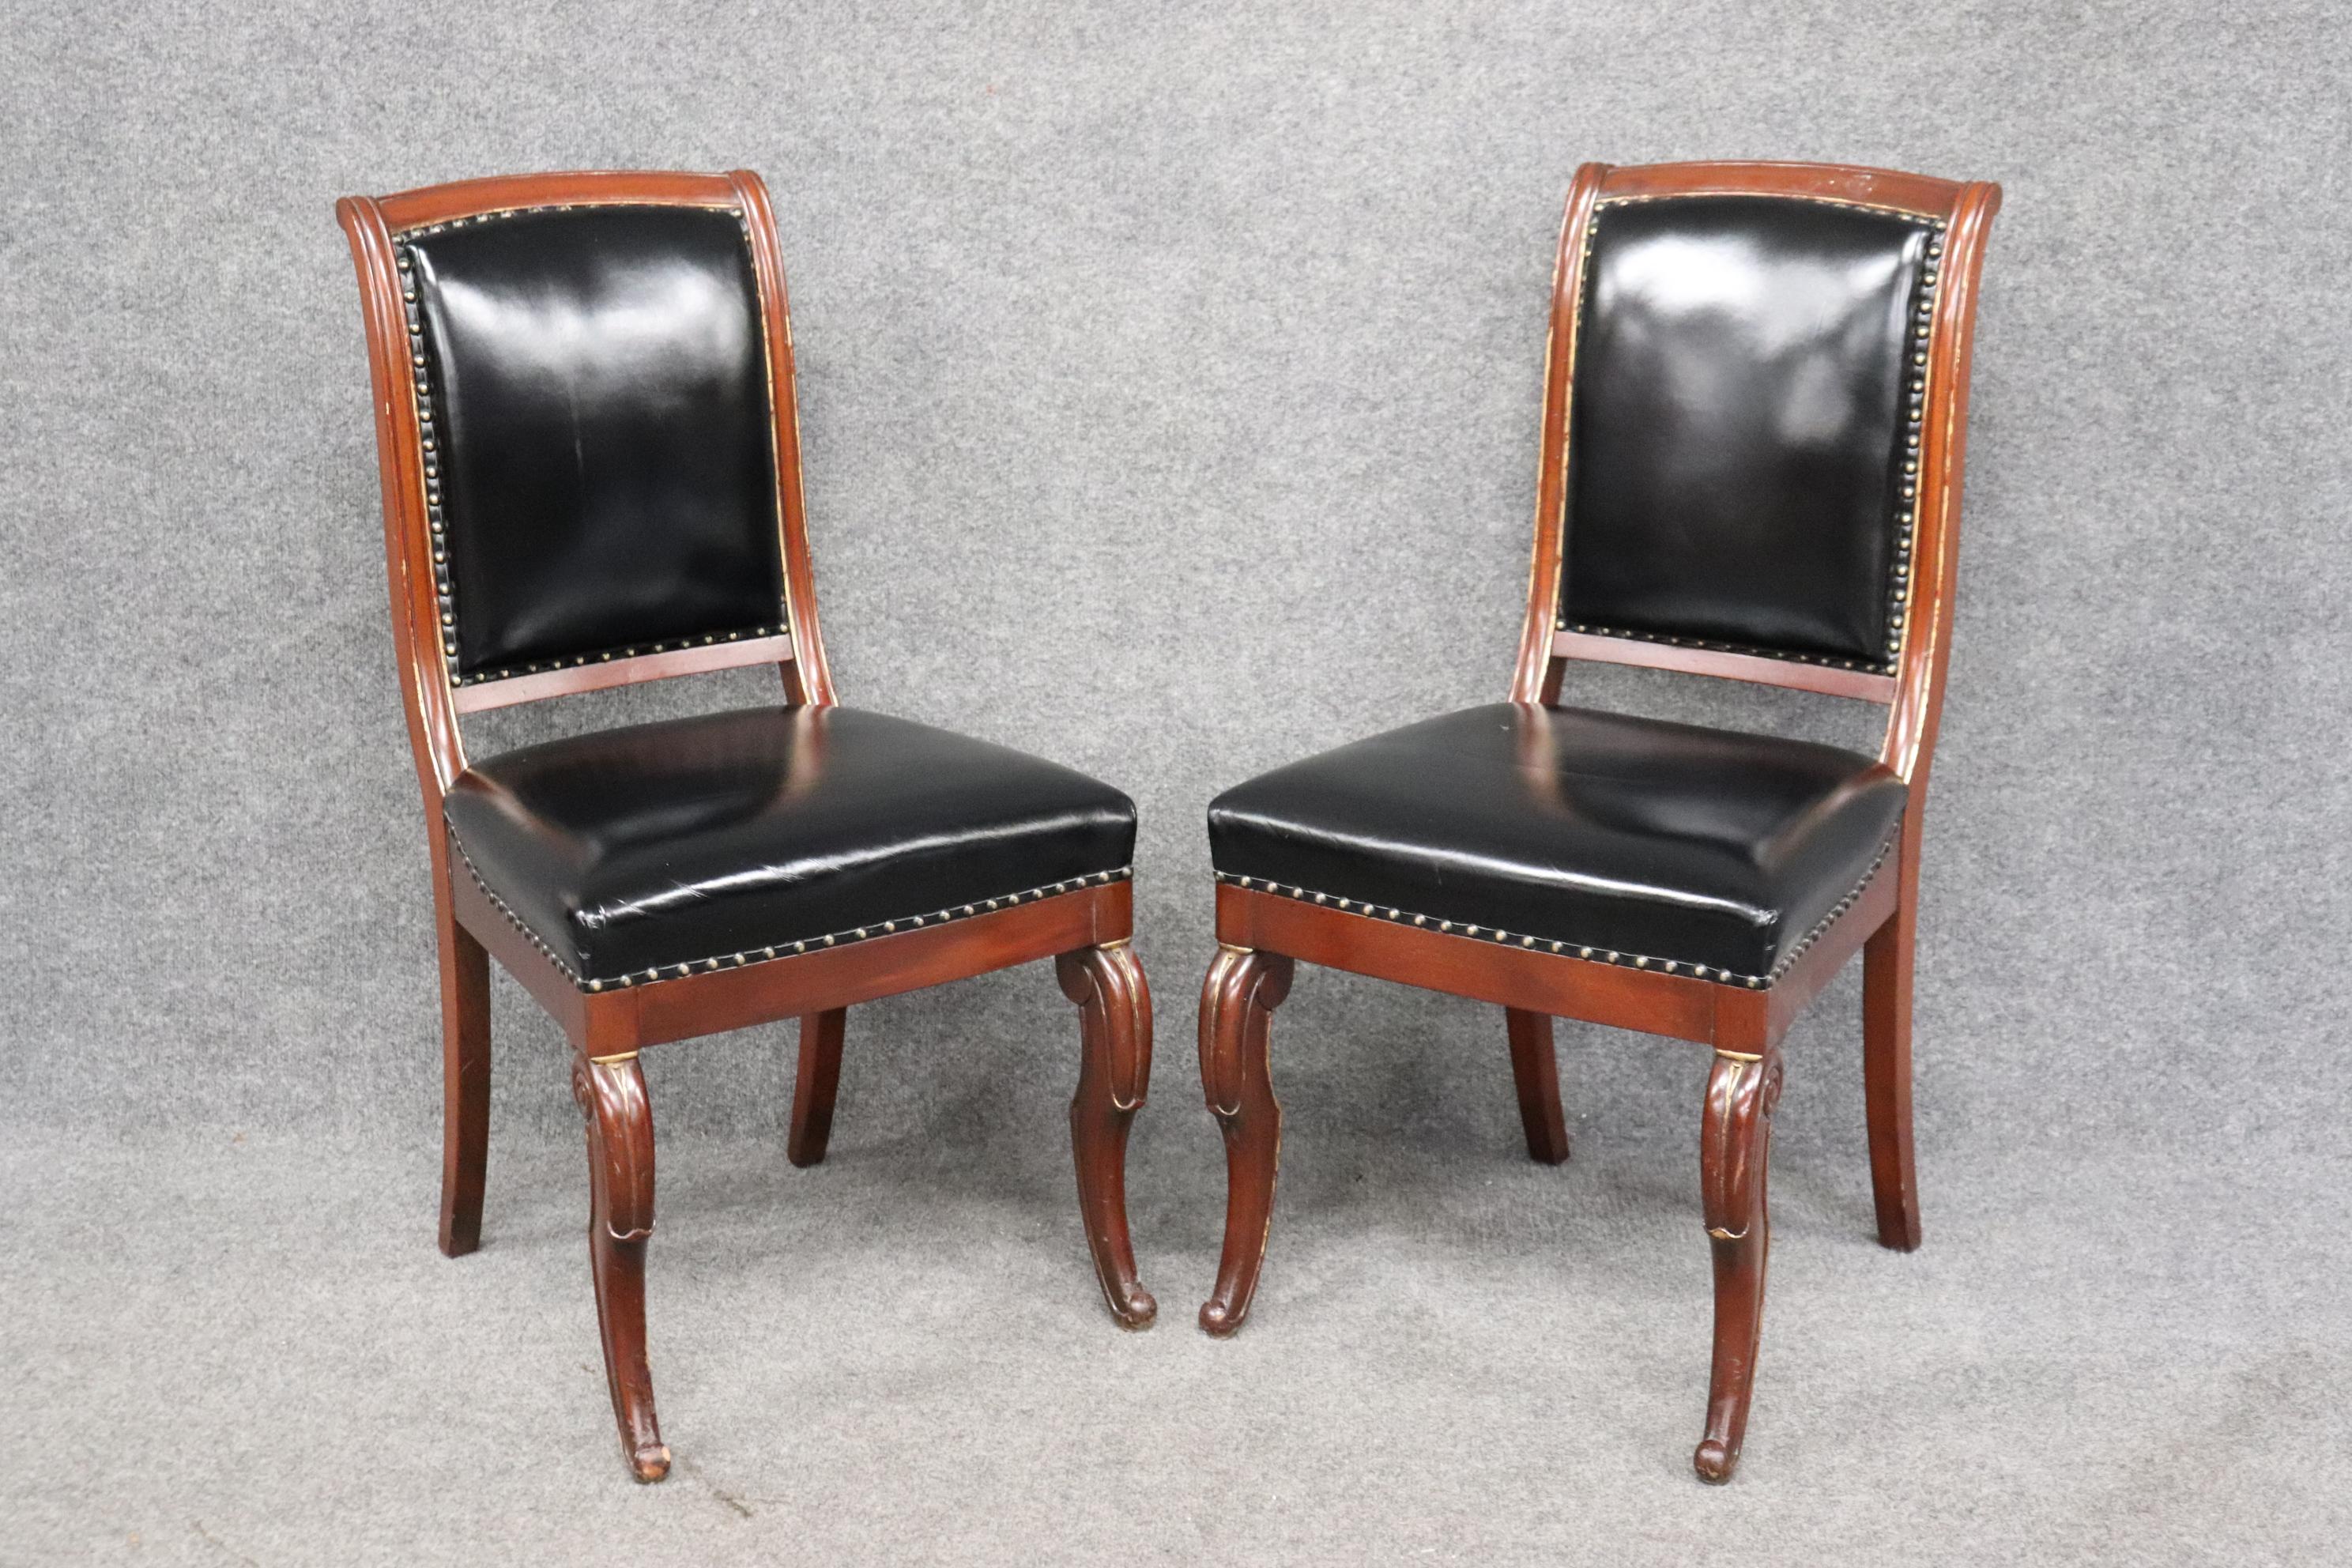 Dimensions- H: 35in W: 18 3/4in D: 21in SH: 18 1/2in

This Set of 4 signed French Jean Selme for Jansen Regency dining side chairs is perfect for you and your home! This set of chairs is bound to bring a lovely sense of sophistication and